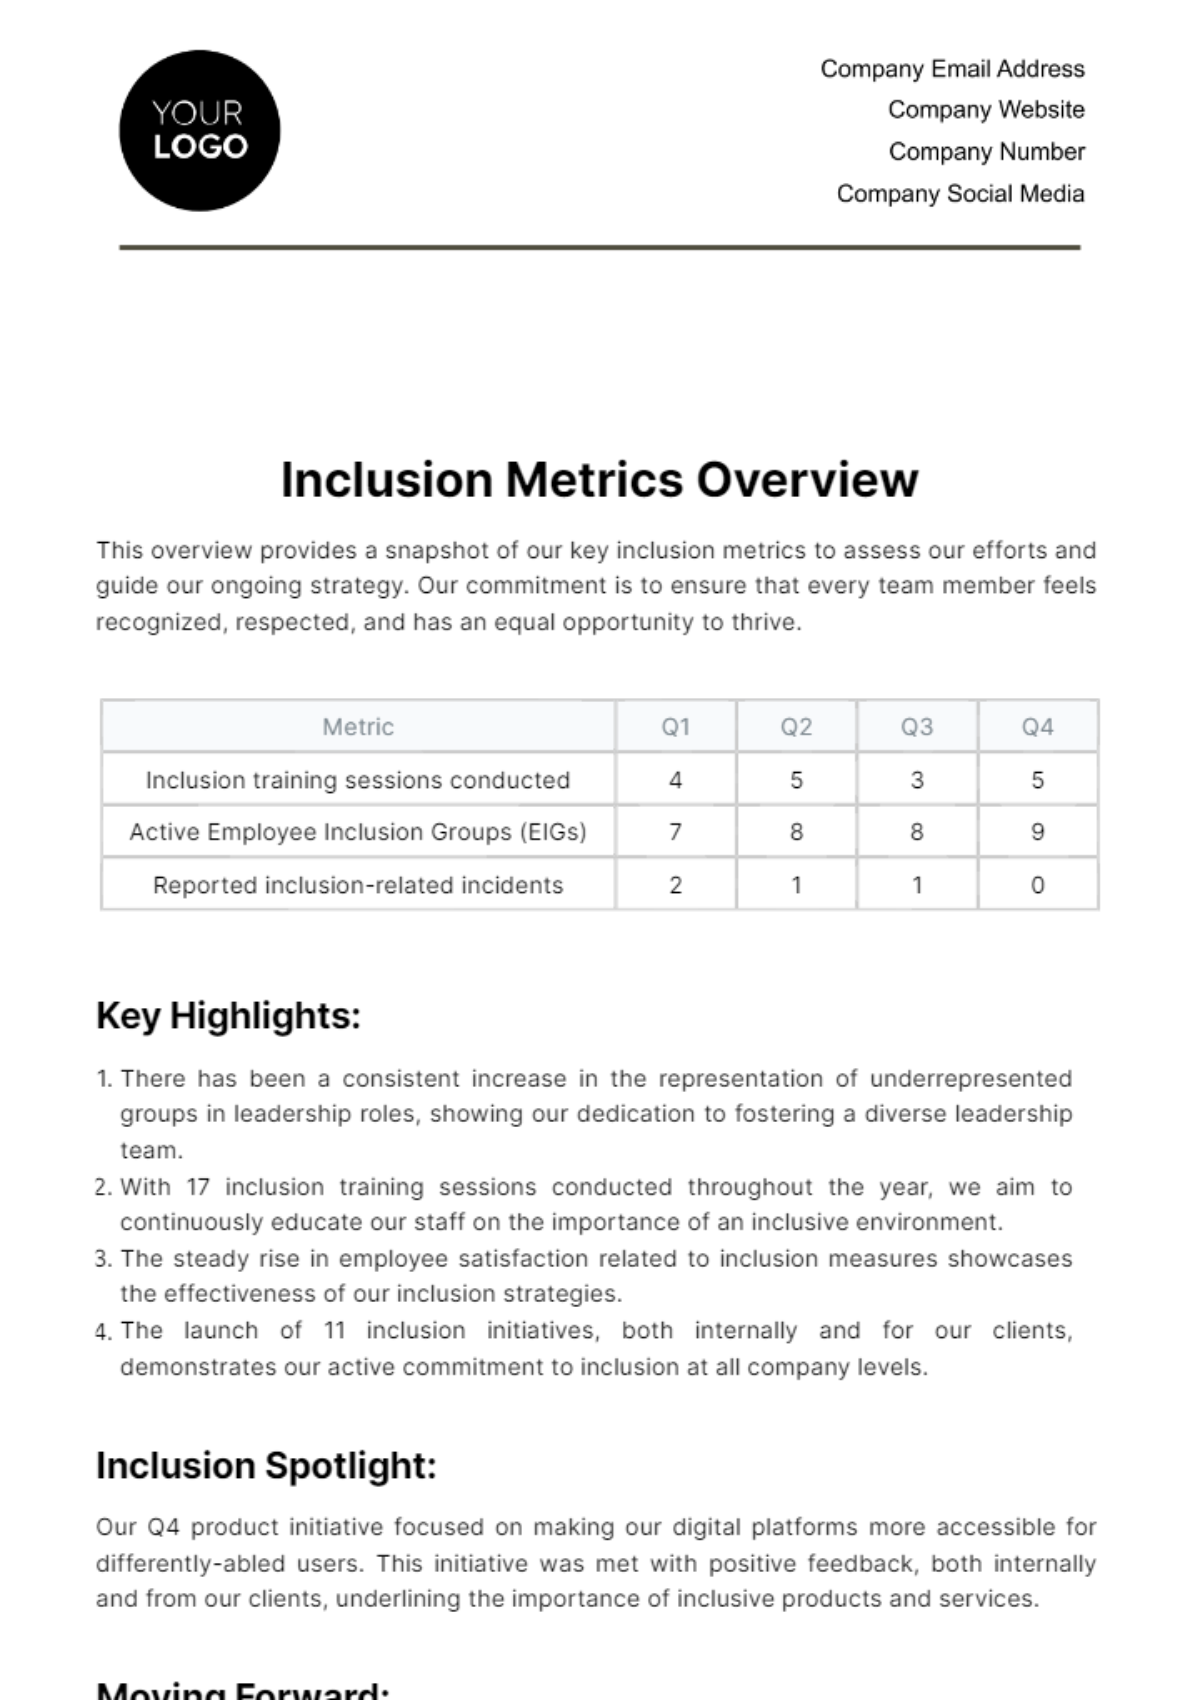 Free Inclusion Metrics Overview HR Template